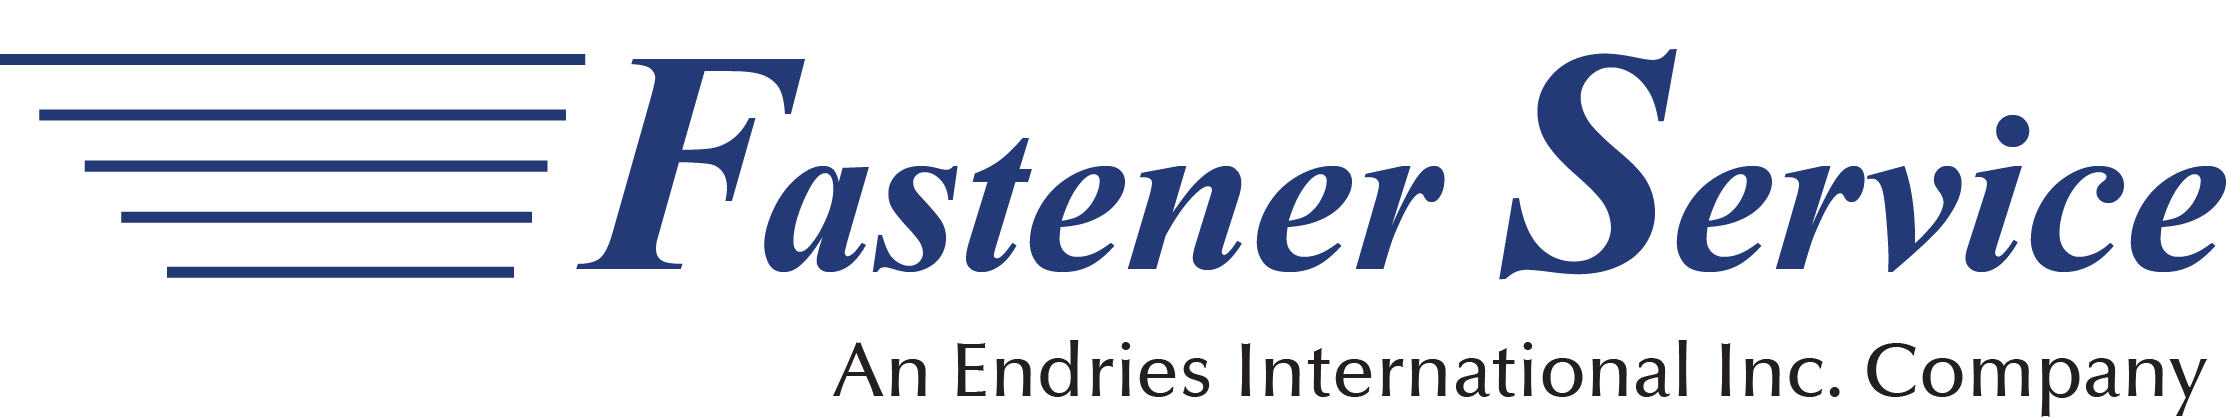 Fastener Service  was acquired by Endries in 2020